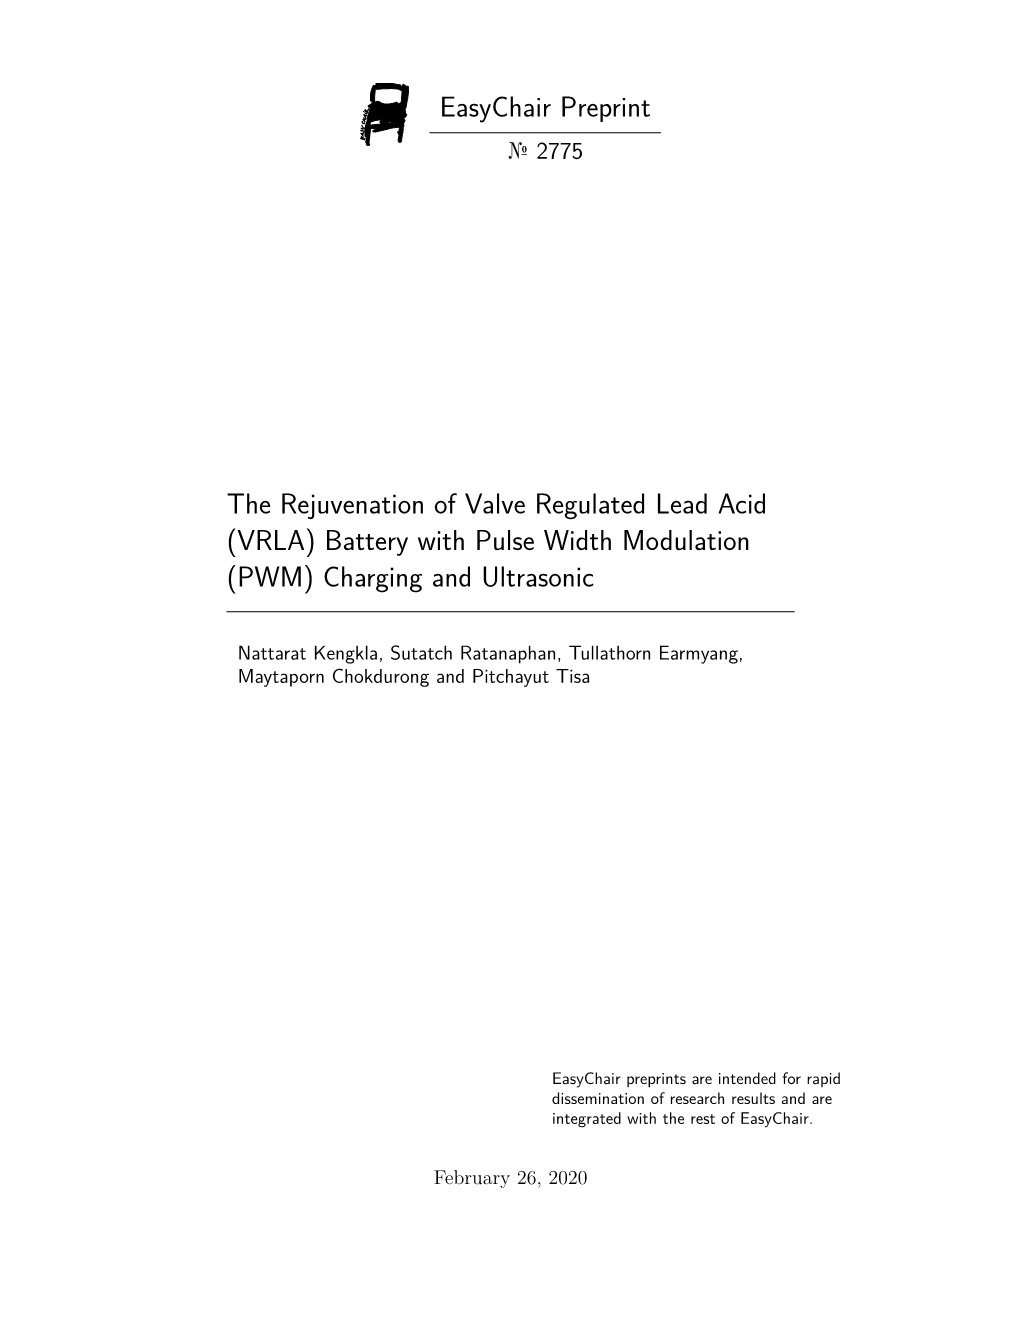 The Rejuvenation of Valve Regulated Lead Acid (VRLA) Battery with Pulse Width Modulation (PWM) Charging and Ultrasonic